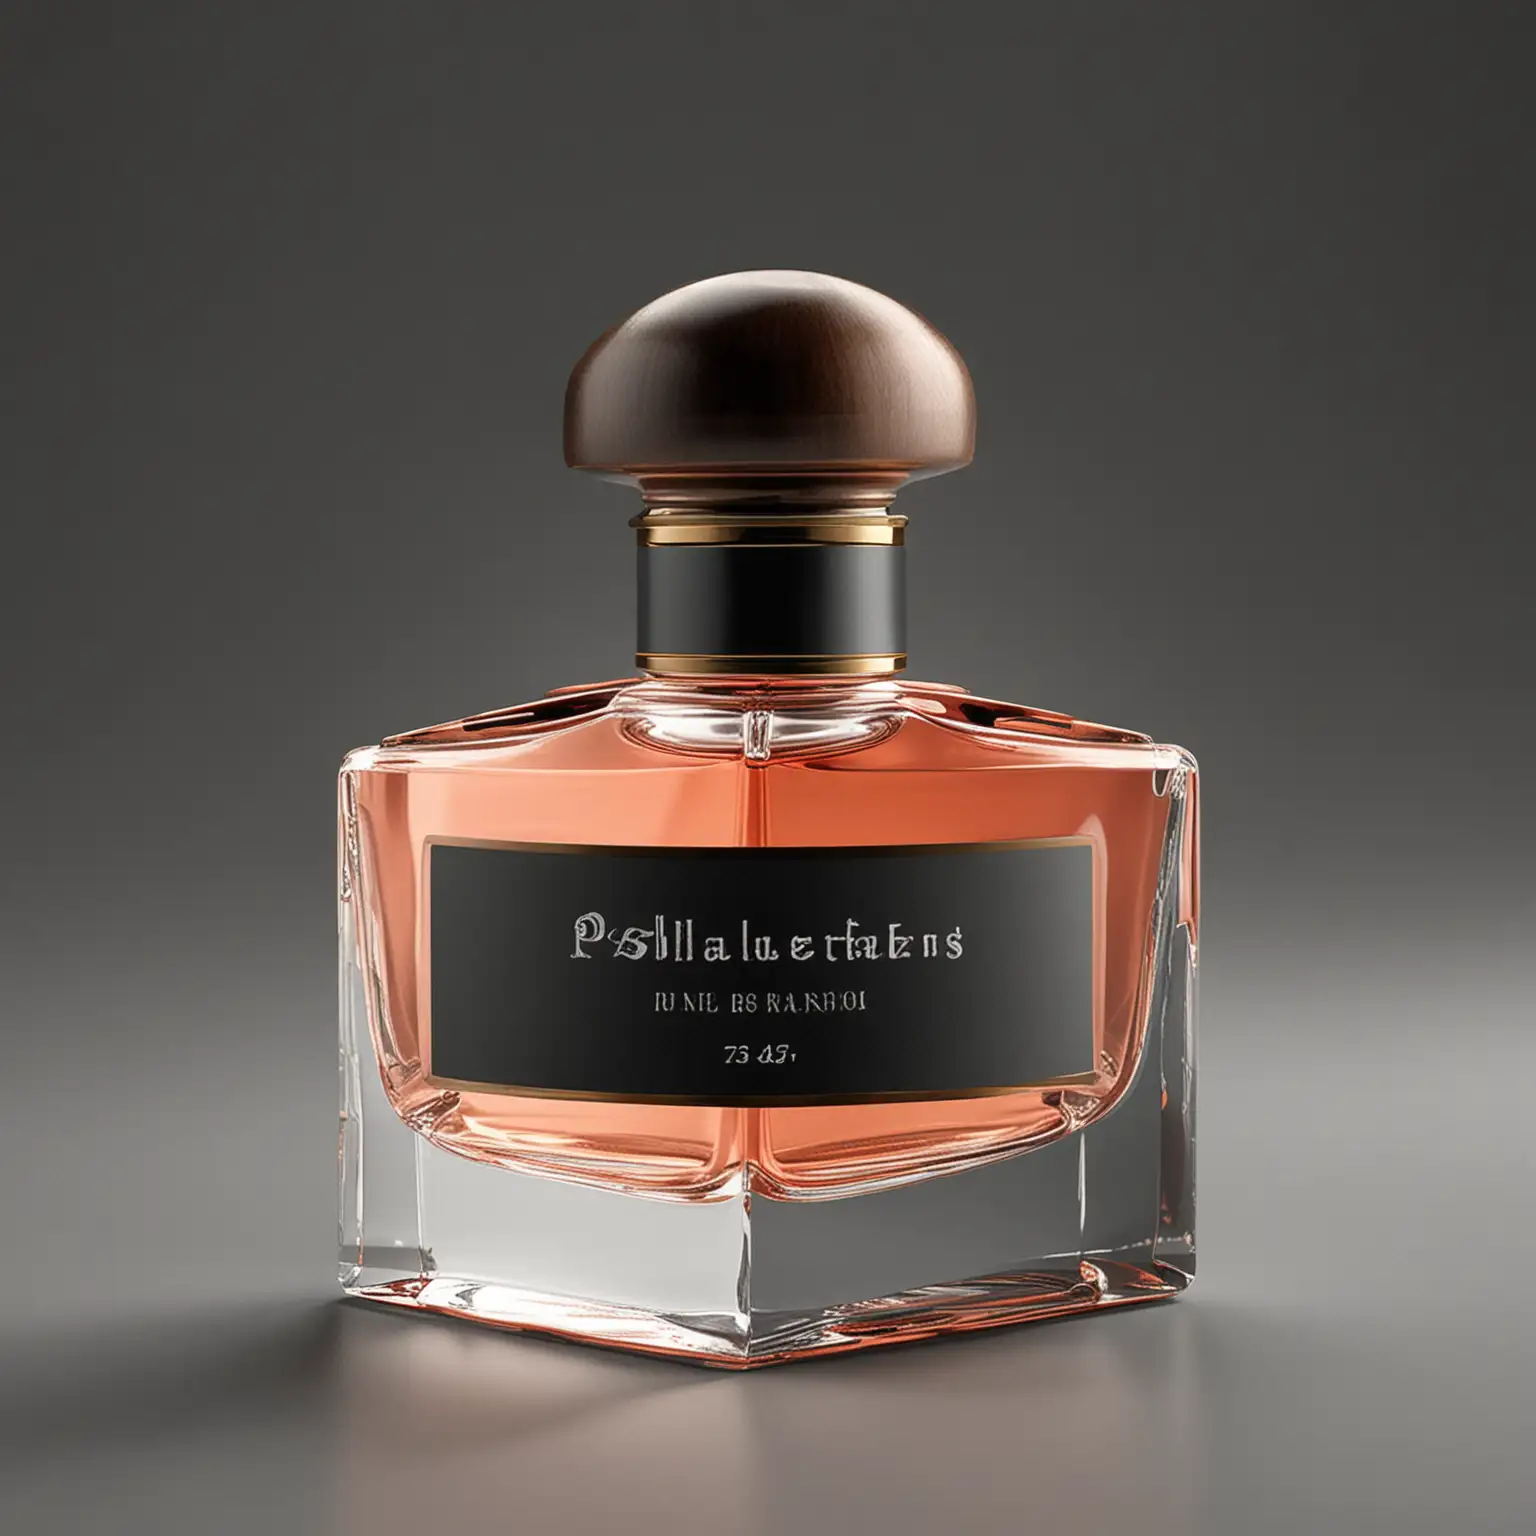 Modern-Minimalistic-Gentleman-Perfume-Collection-with-Vibrant-Colors